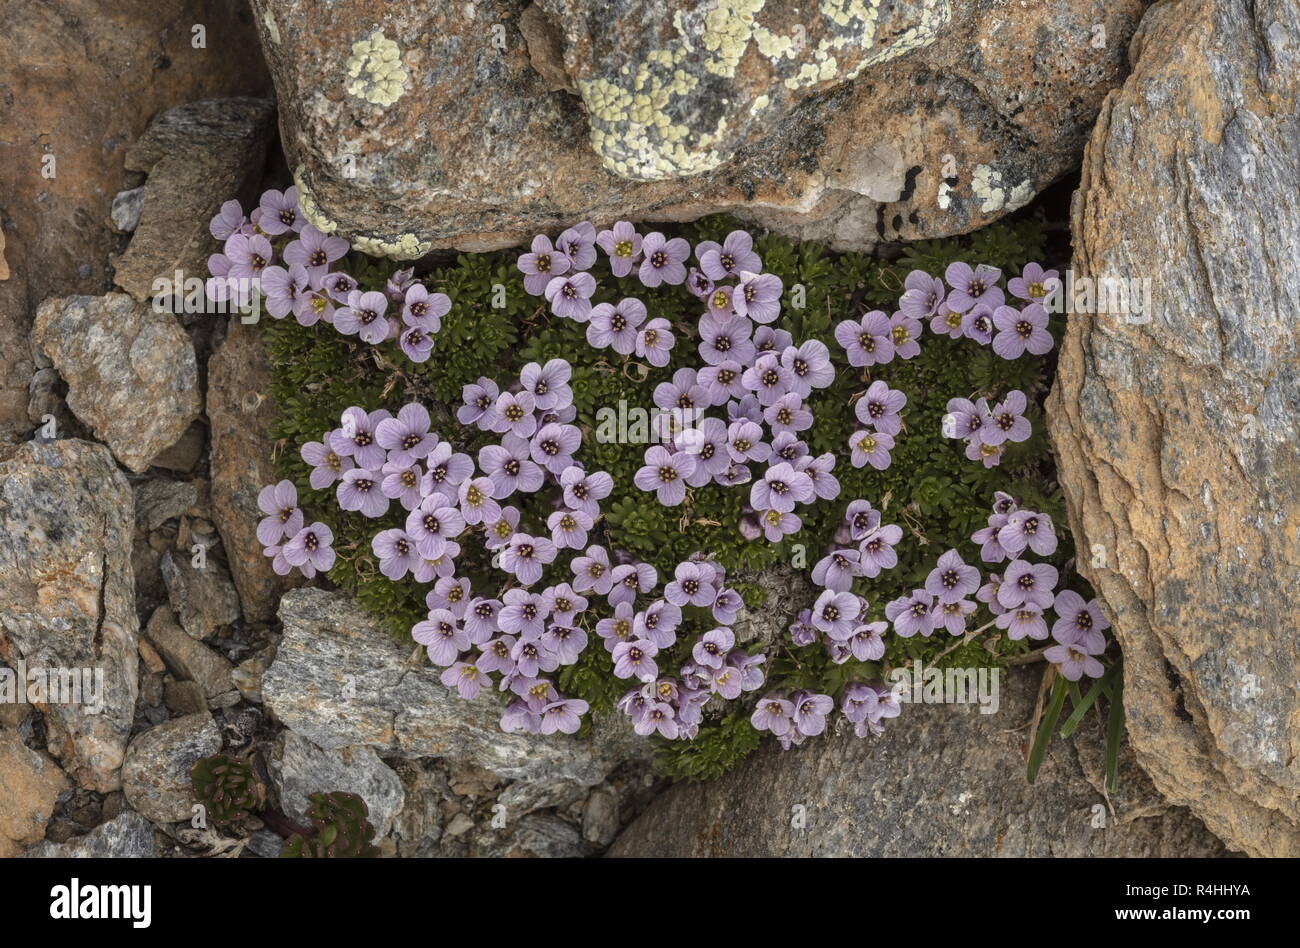 Pyrenean Whitlow Grass, Petrocallis pyrenaica, in flower high on the Col de L'Iseran, French Alps. Stock Photo